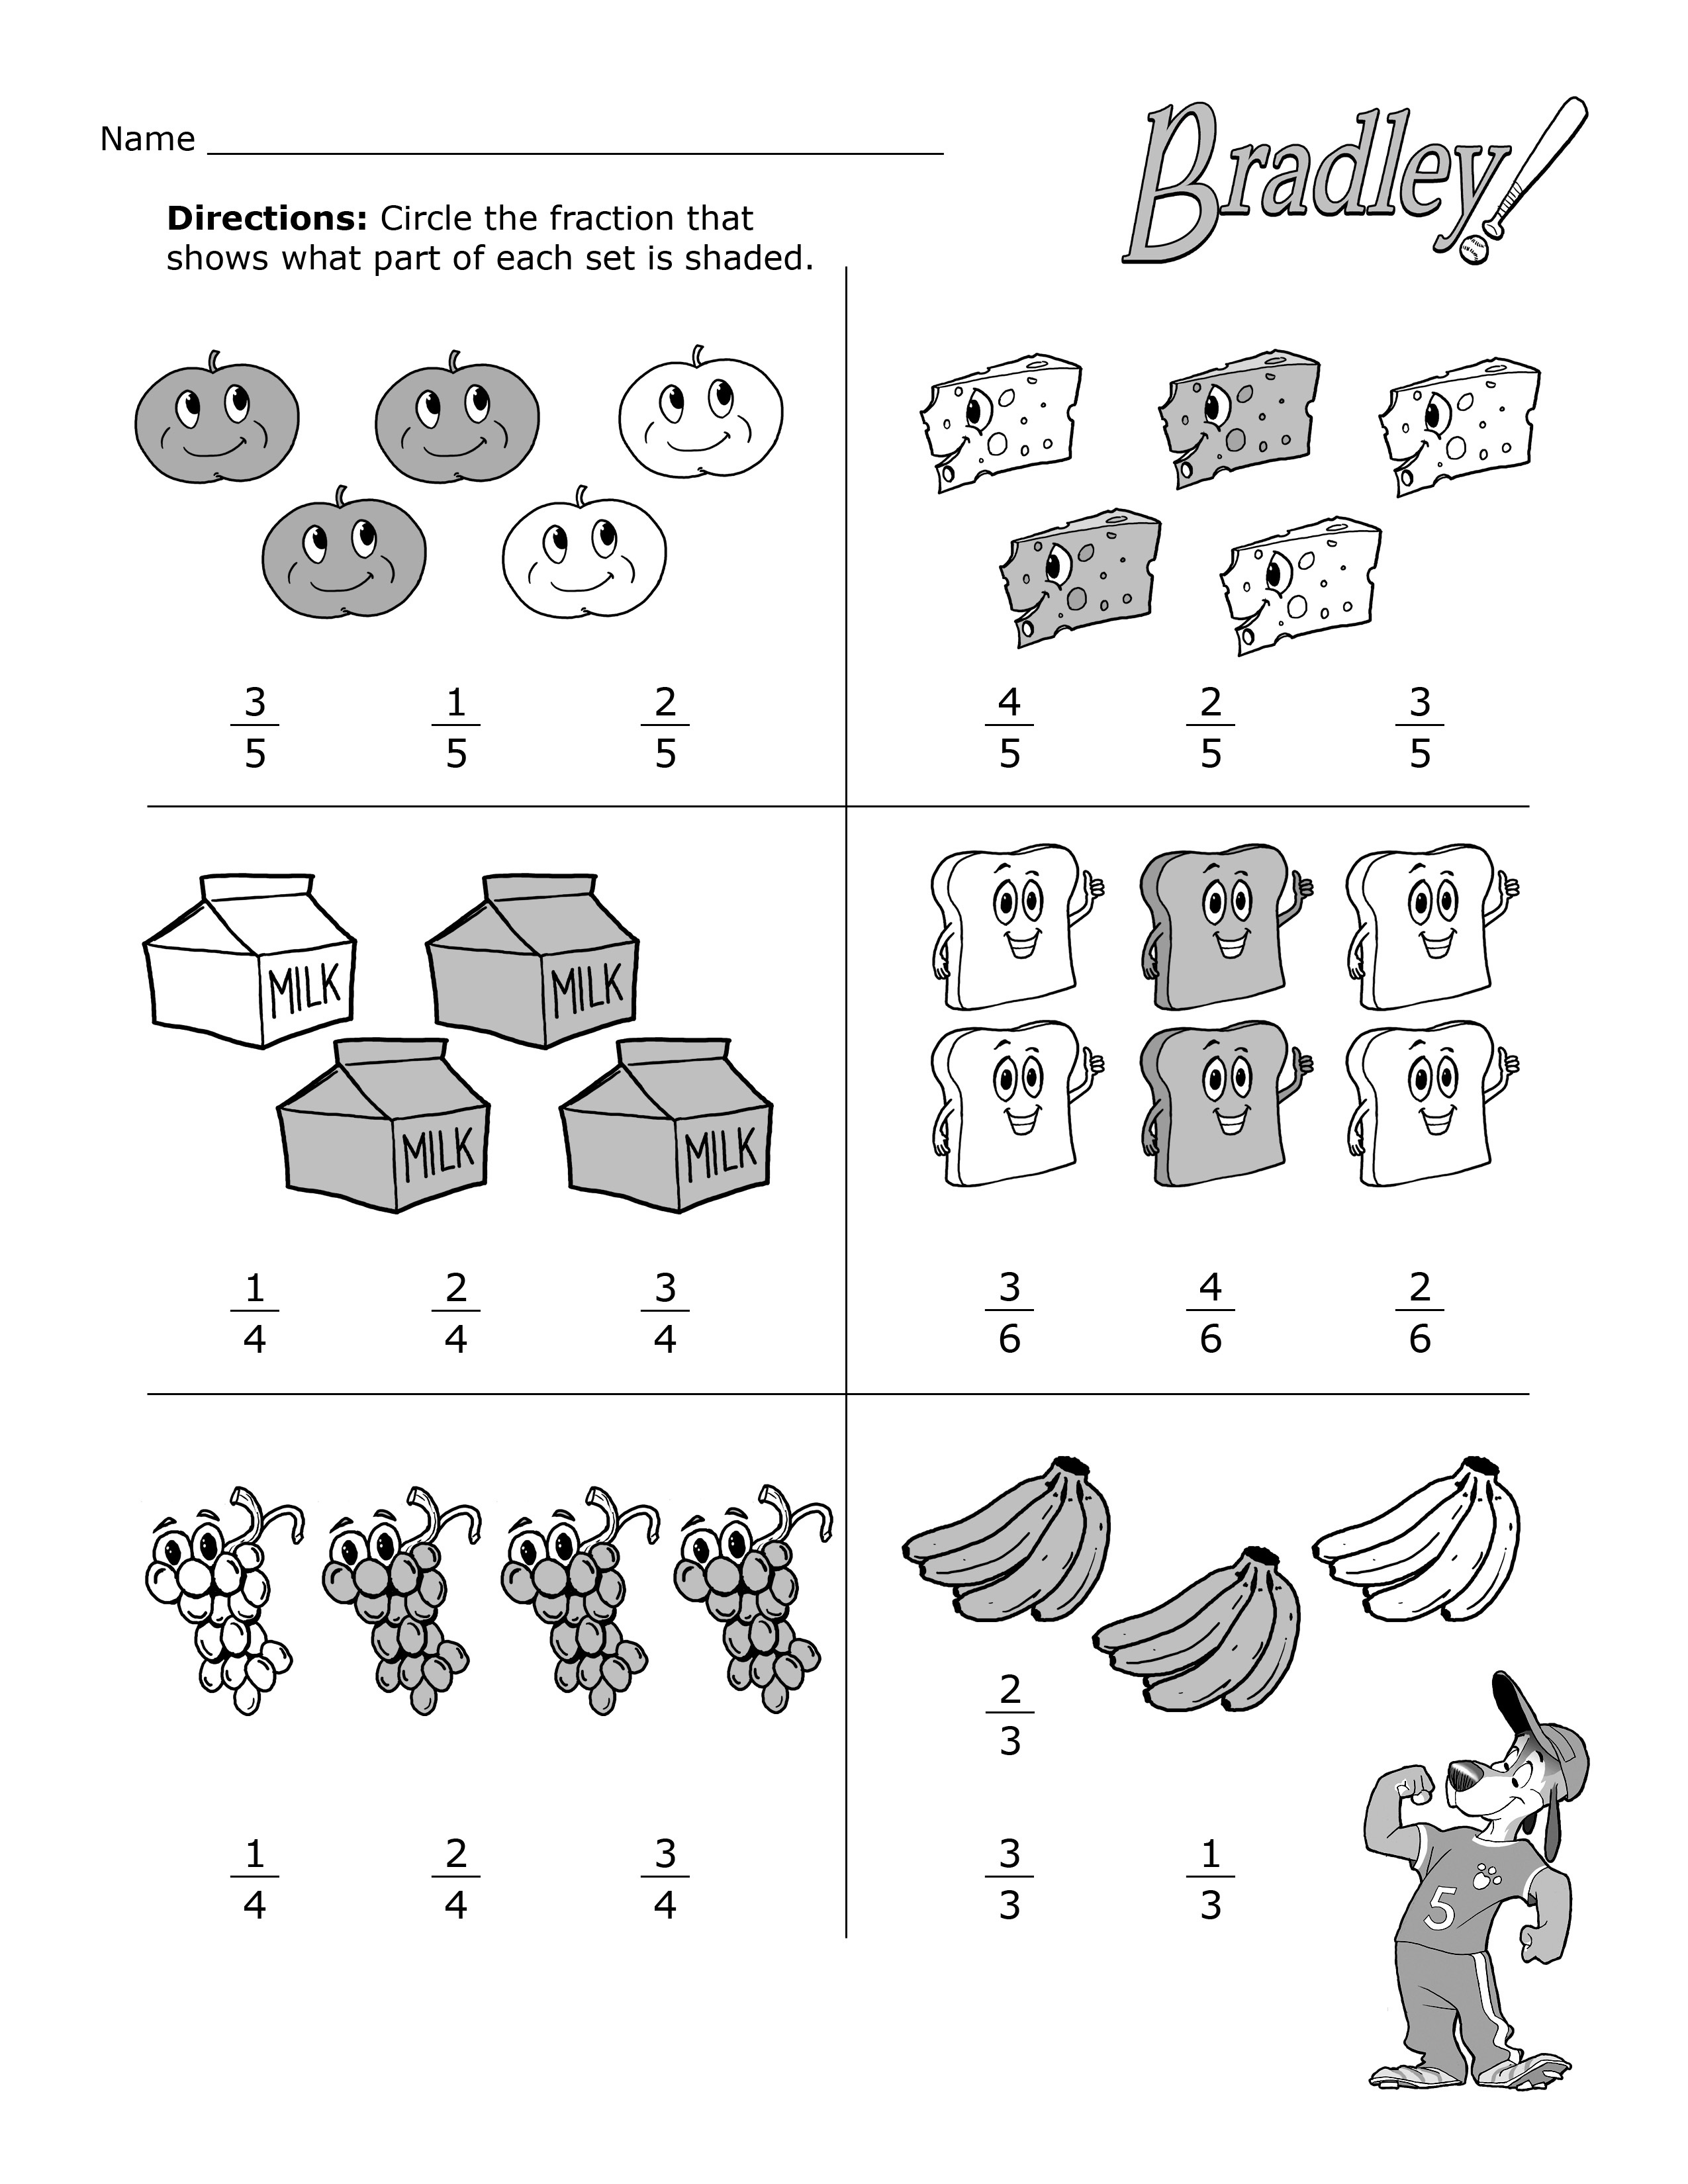 printables-fun-math-worksheets-for-2nd-grade-tempojs-thousands-of-printable-activities